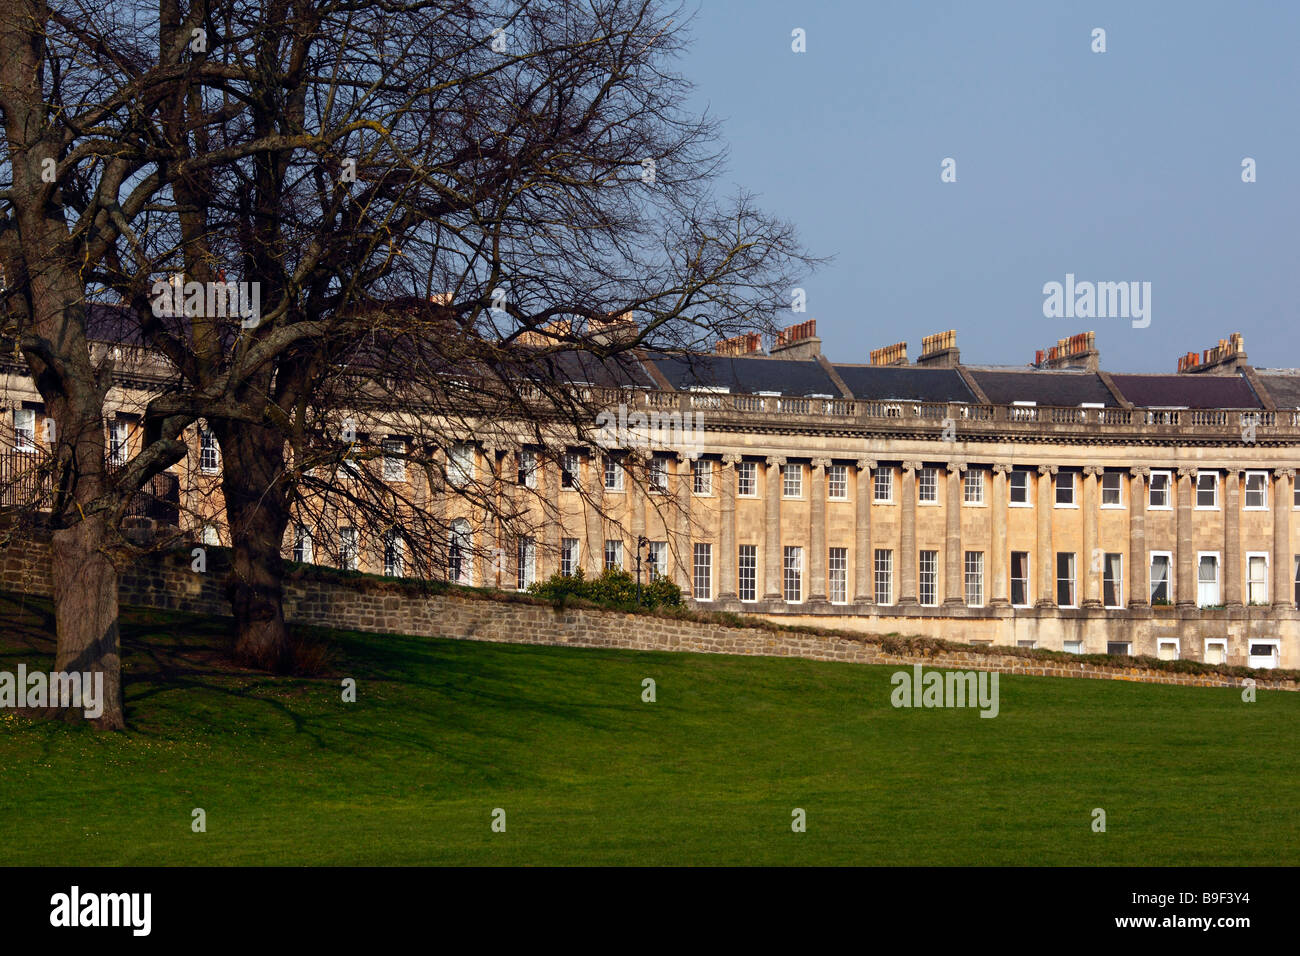 The Crescent in the City of Bath in the South West of England Stock Photo